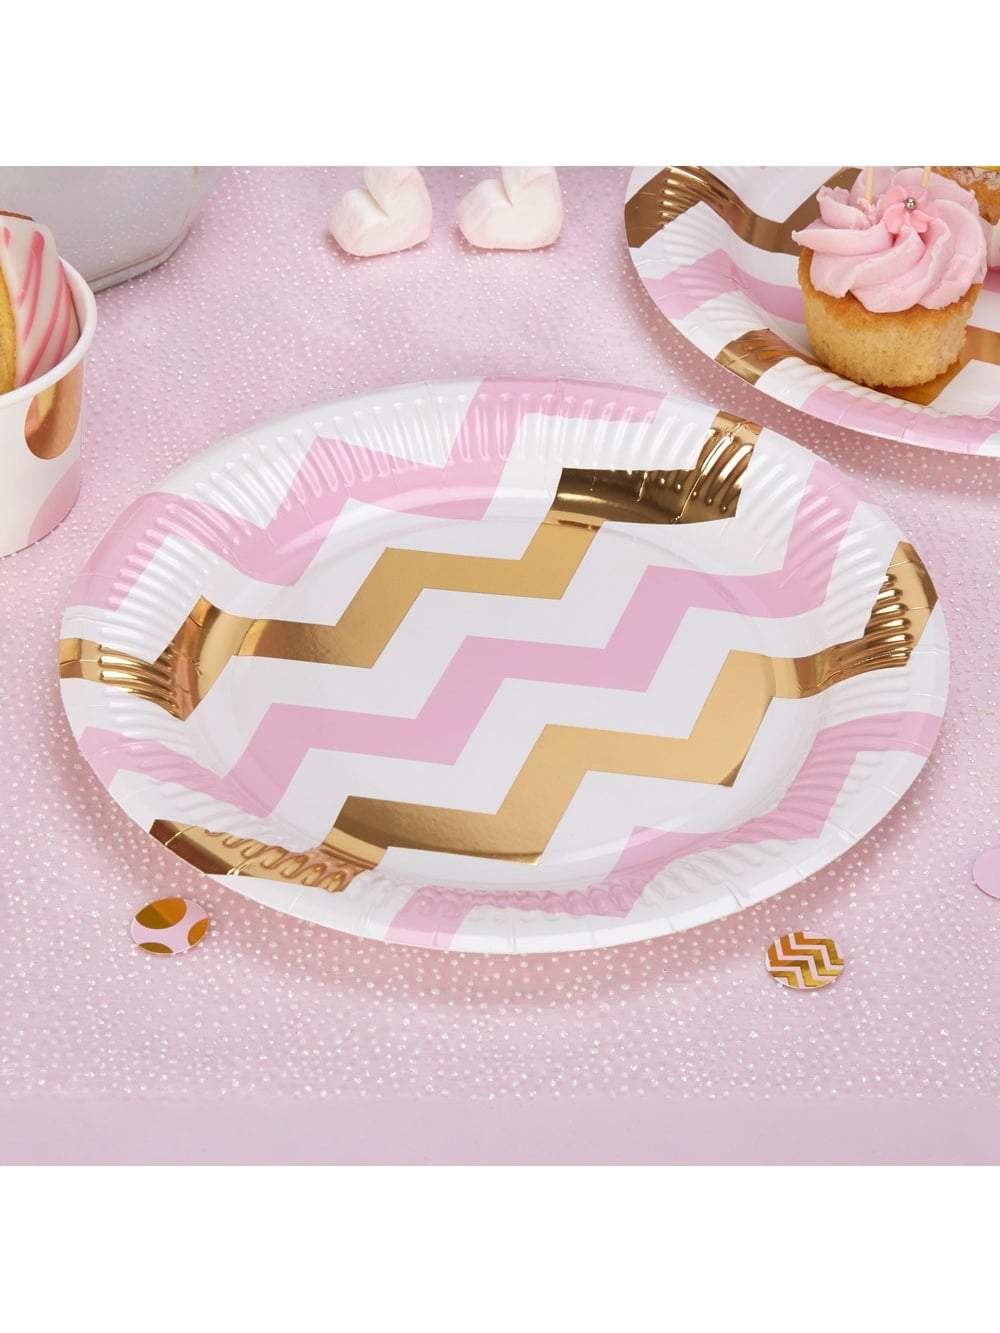 Pink and Gold Chevron Plates (8) Hen Party Superstore